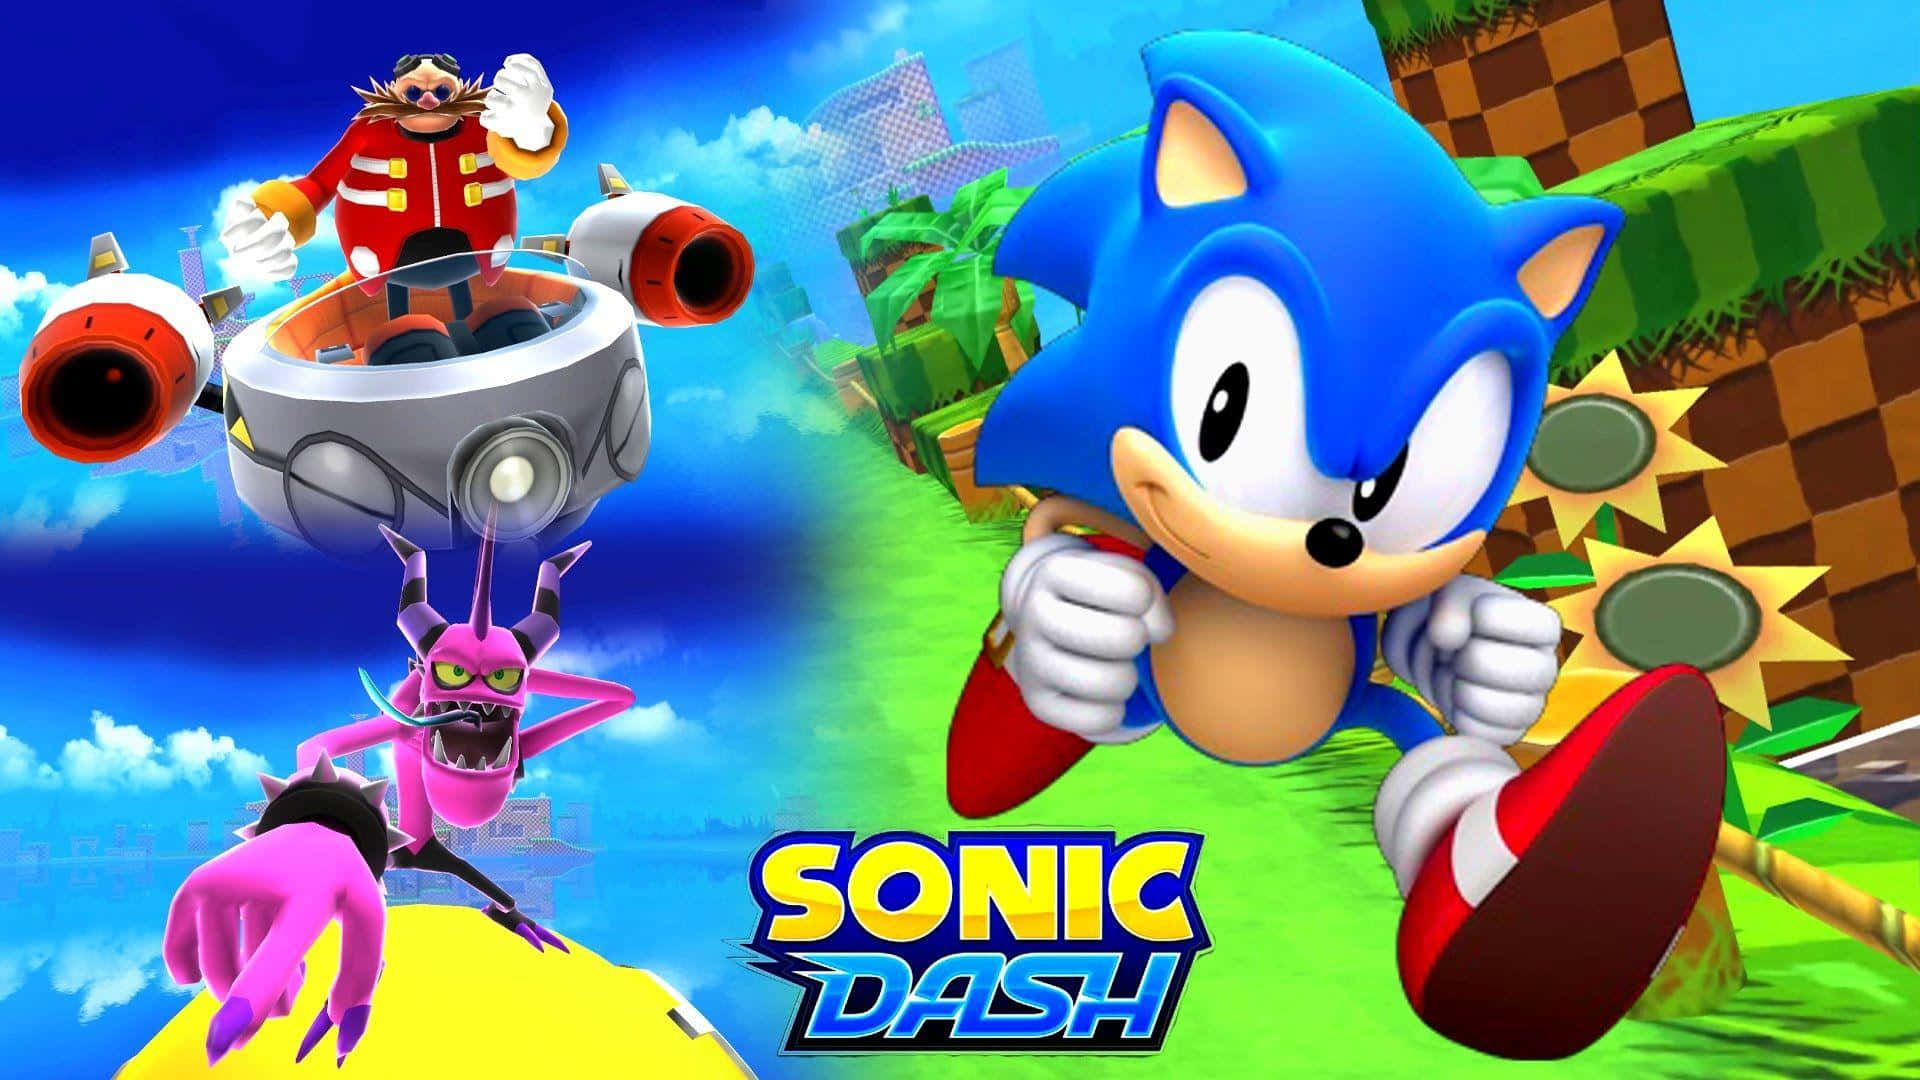 https://wallpapers.com/images/featured/sonic-dash-k7tgicekjzq7ma6m.jpg